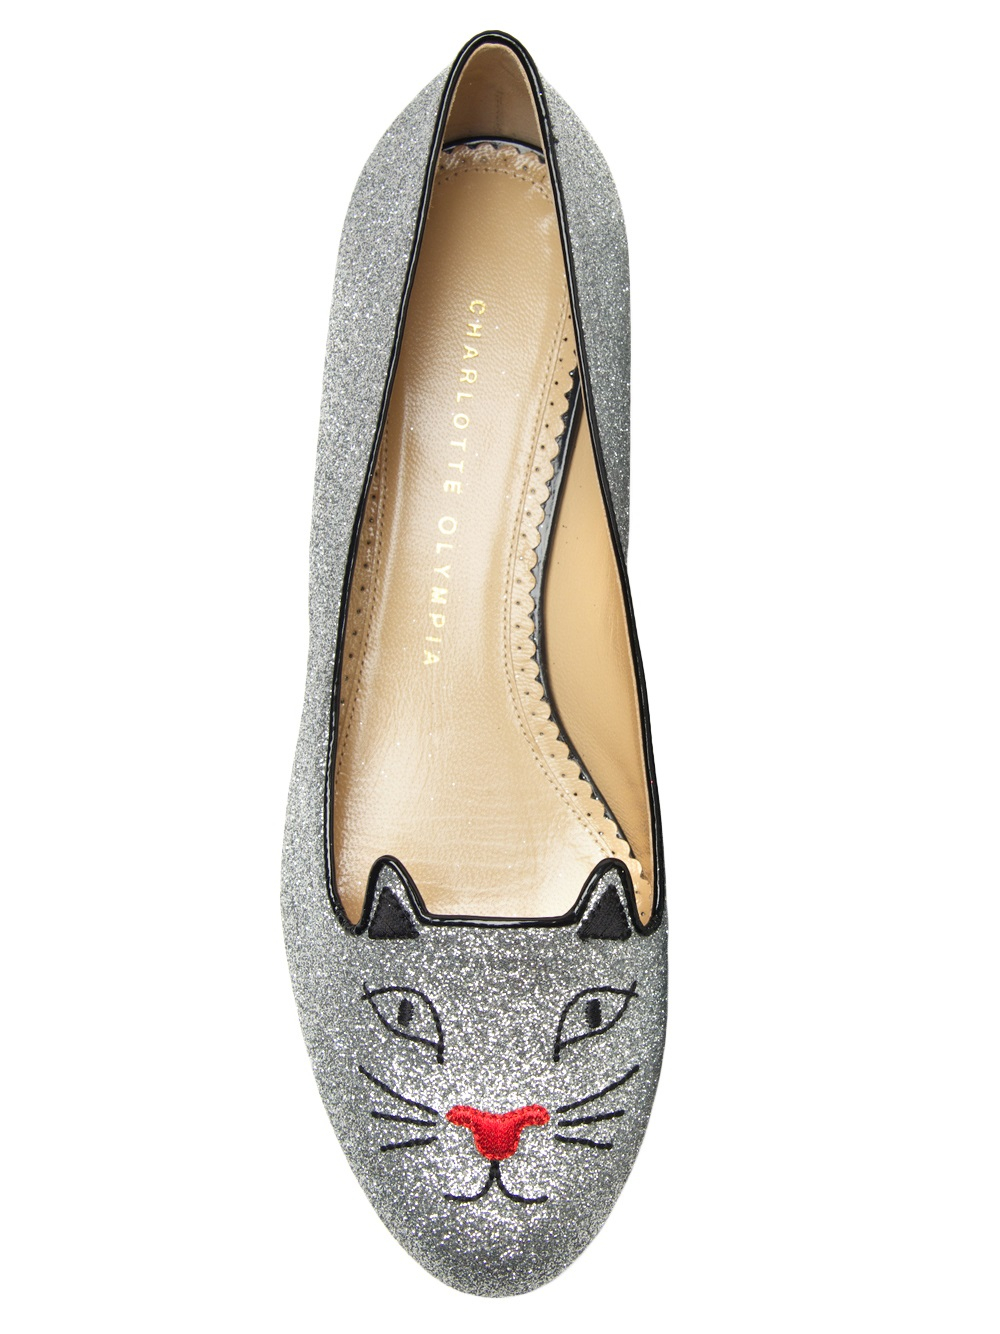 Lyst - Charlotte Olympia Kitty Loafers in Metallic